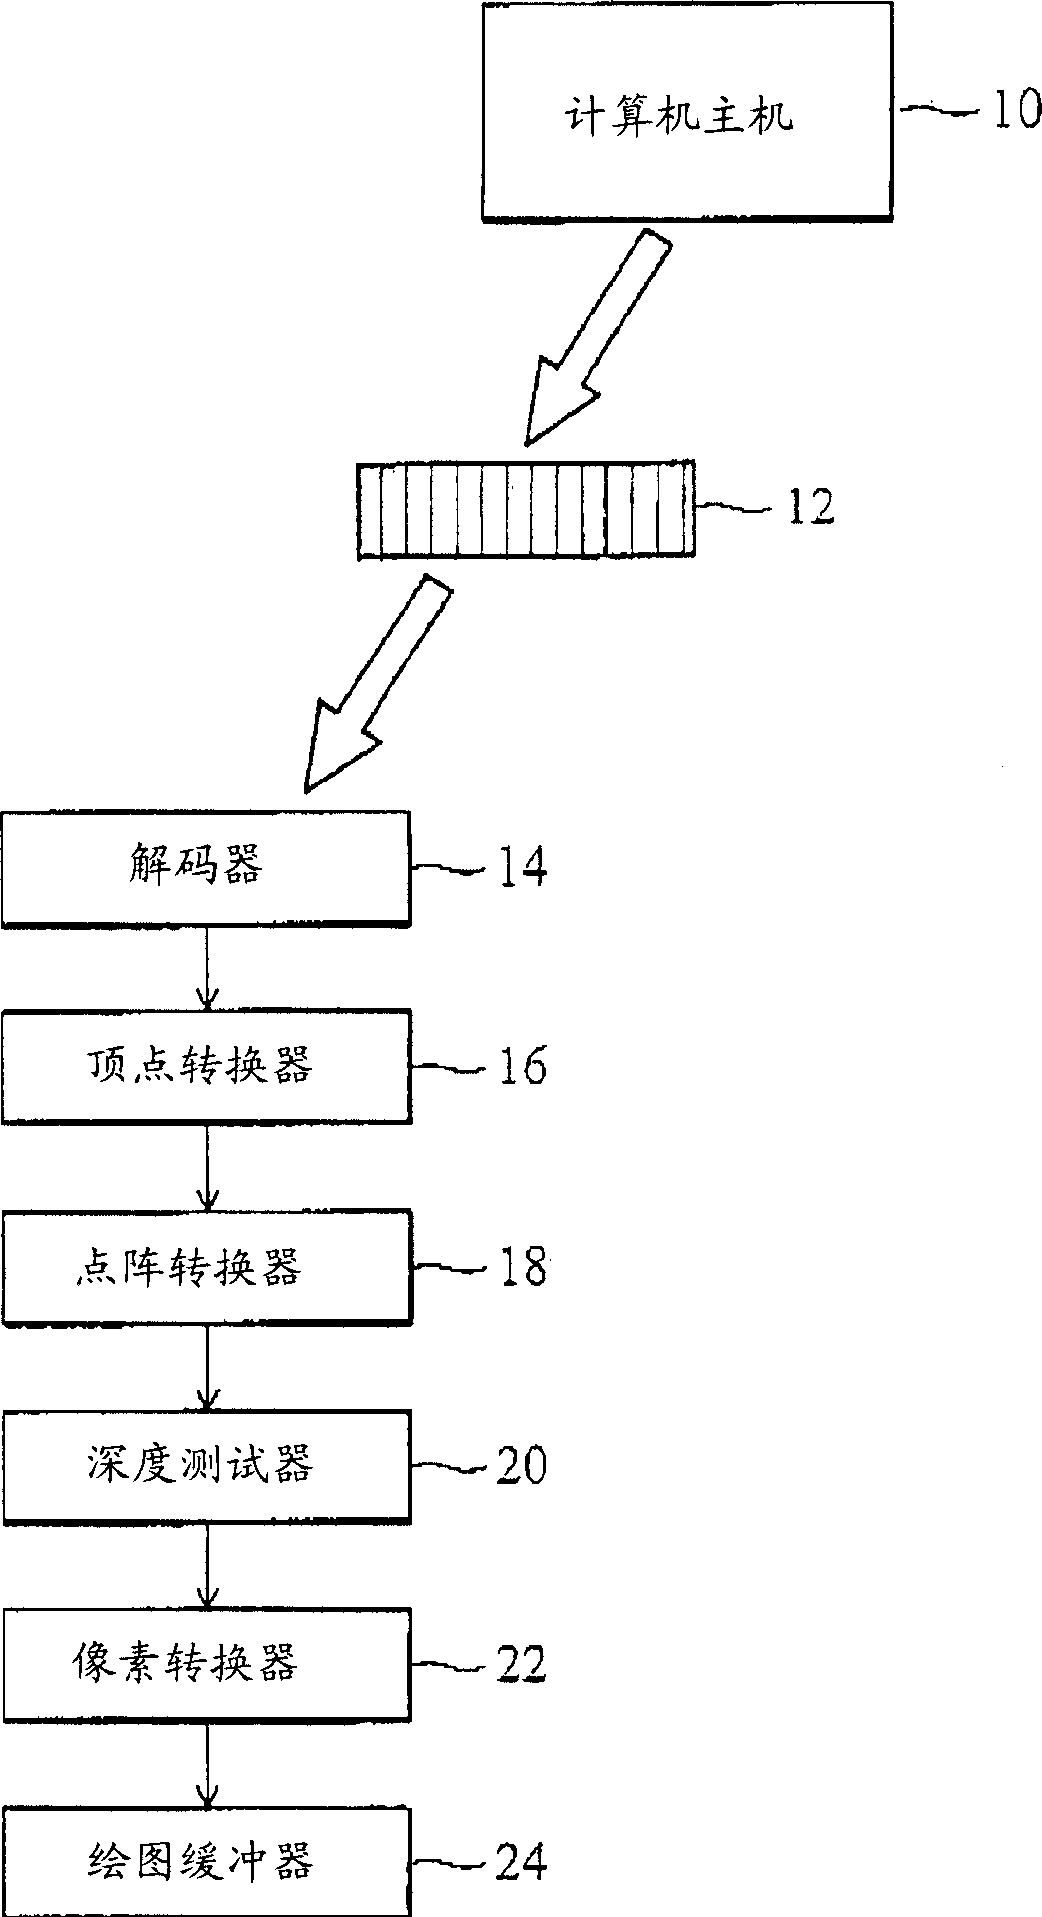 Method and apparatus for operating improved stencil shadow awl